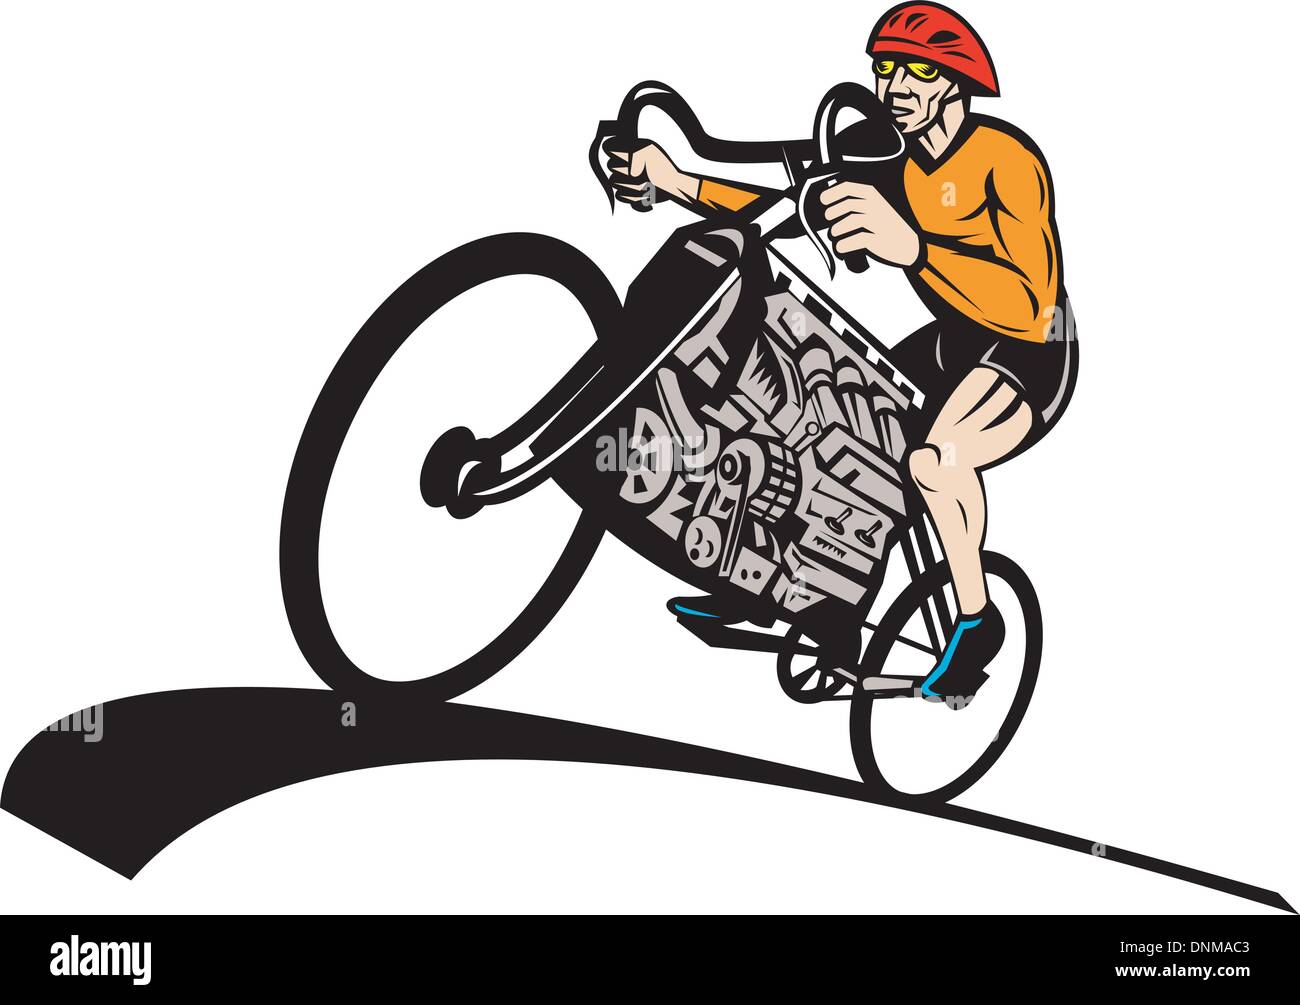 illustration of a Cyclist riding racing bicycle with v8 car engine Stock Vector